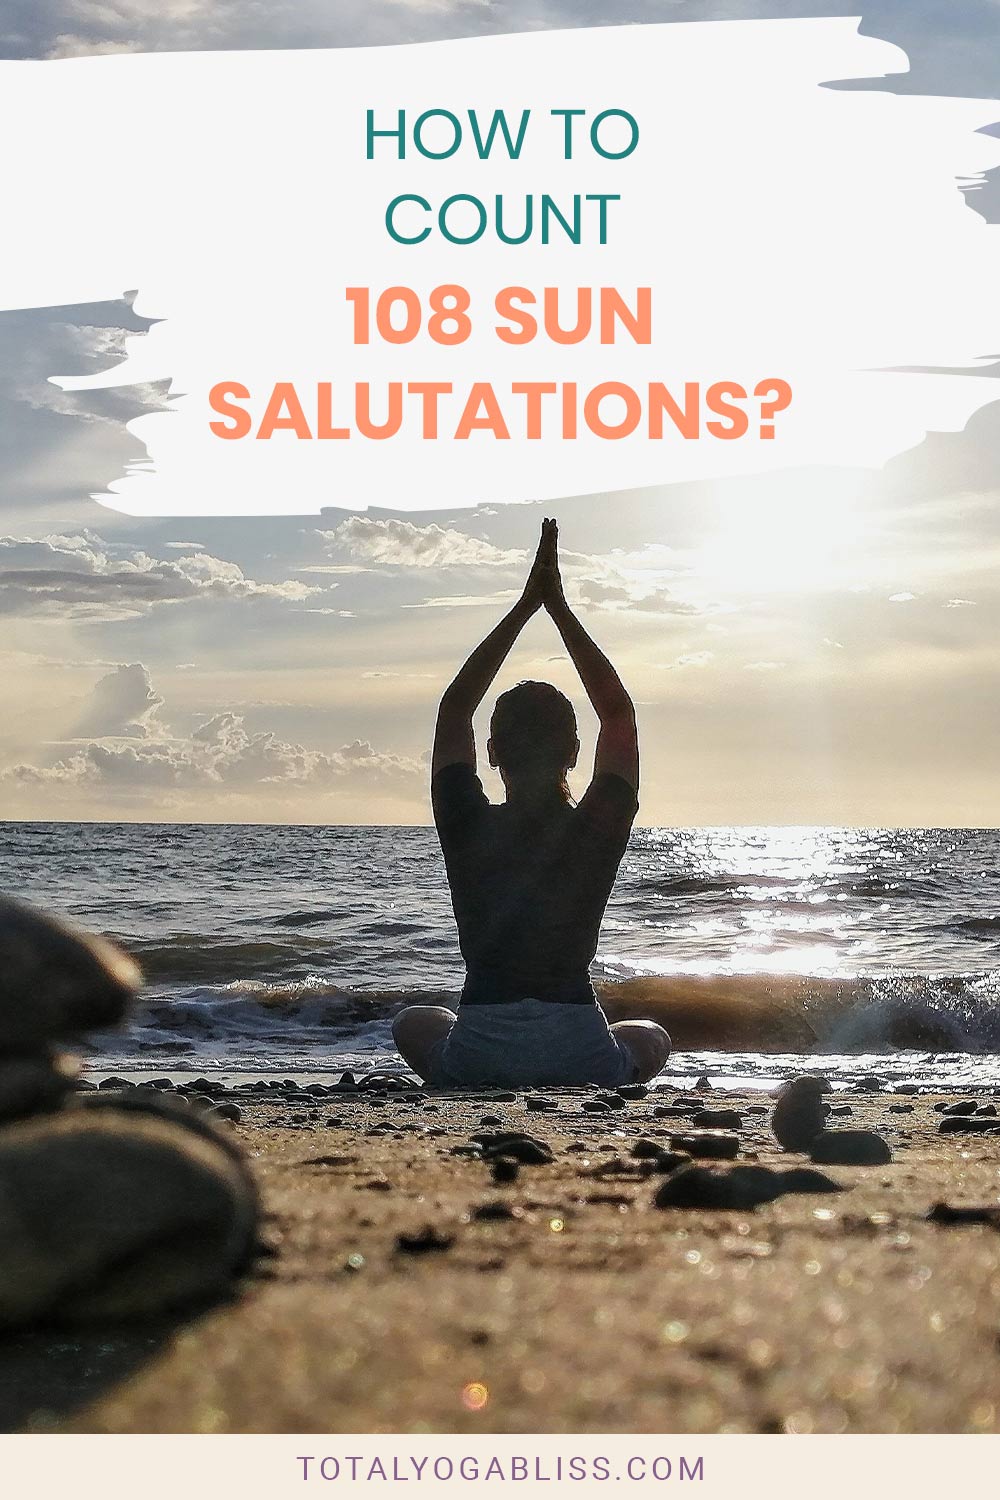 Woman doing salutation pose on a beach - How to Count 108 Sun Salutations?